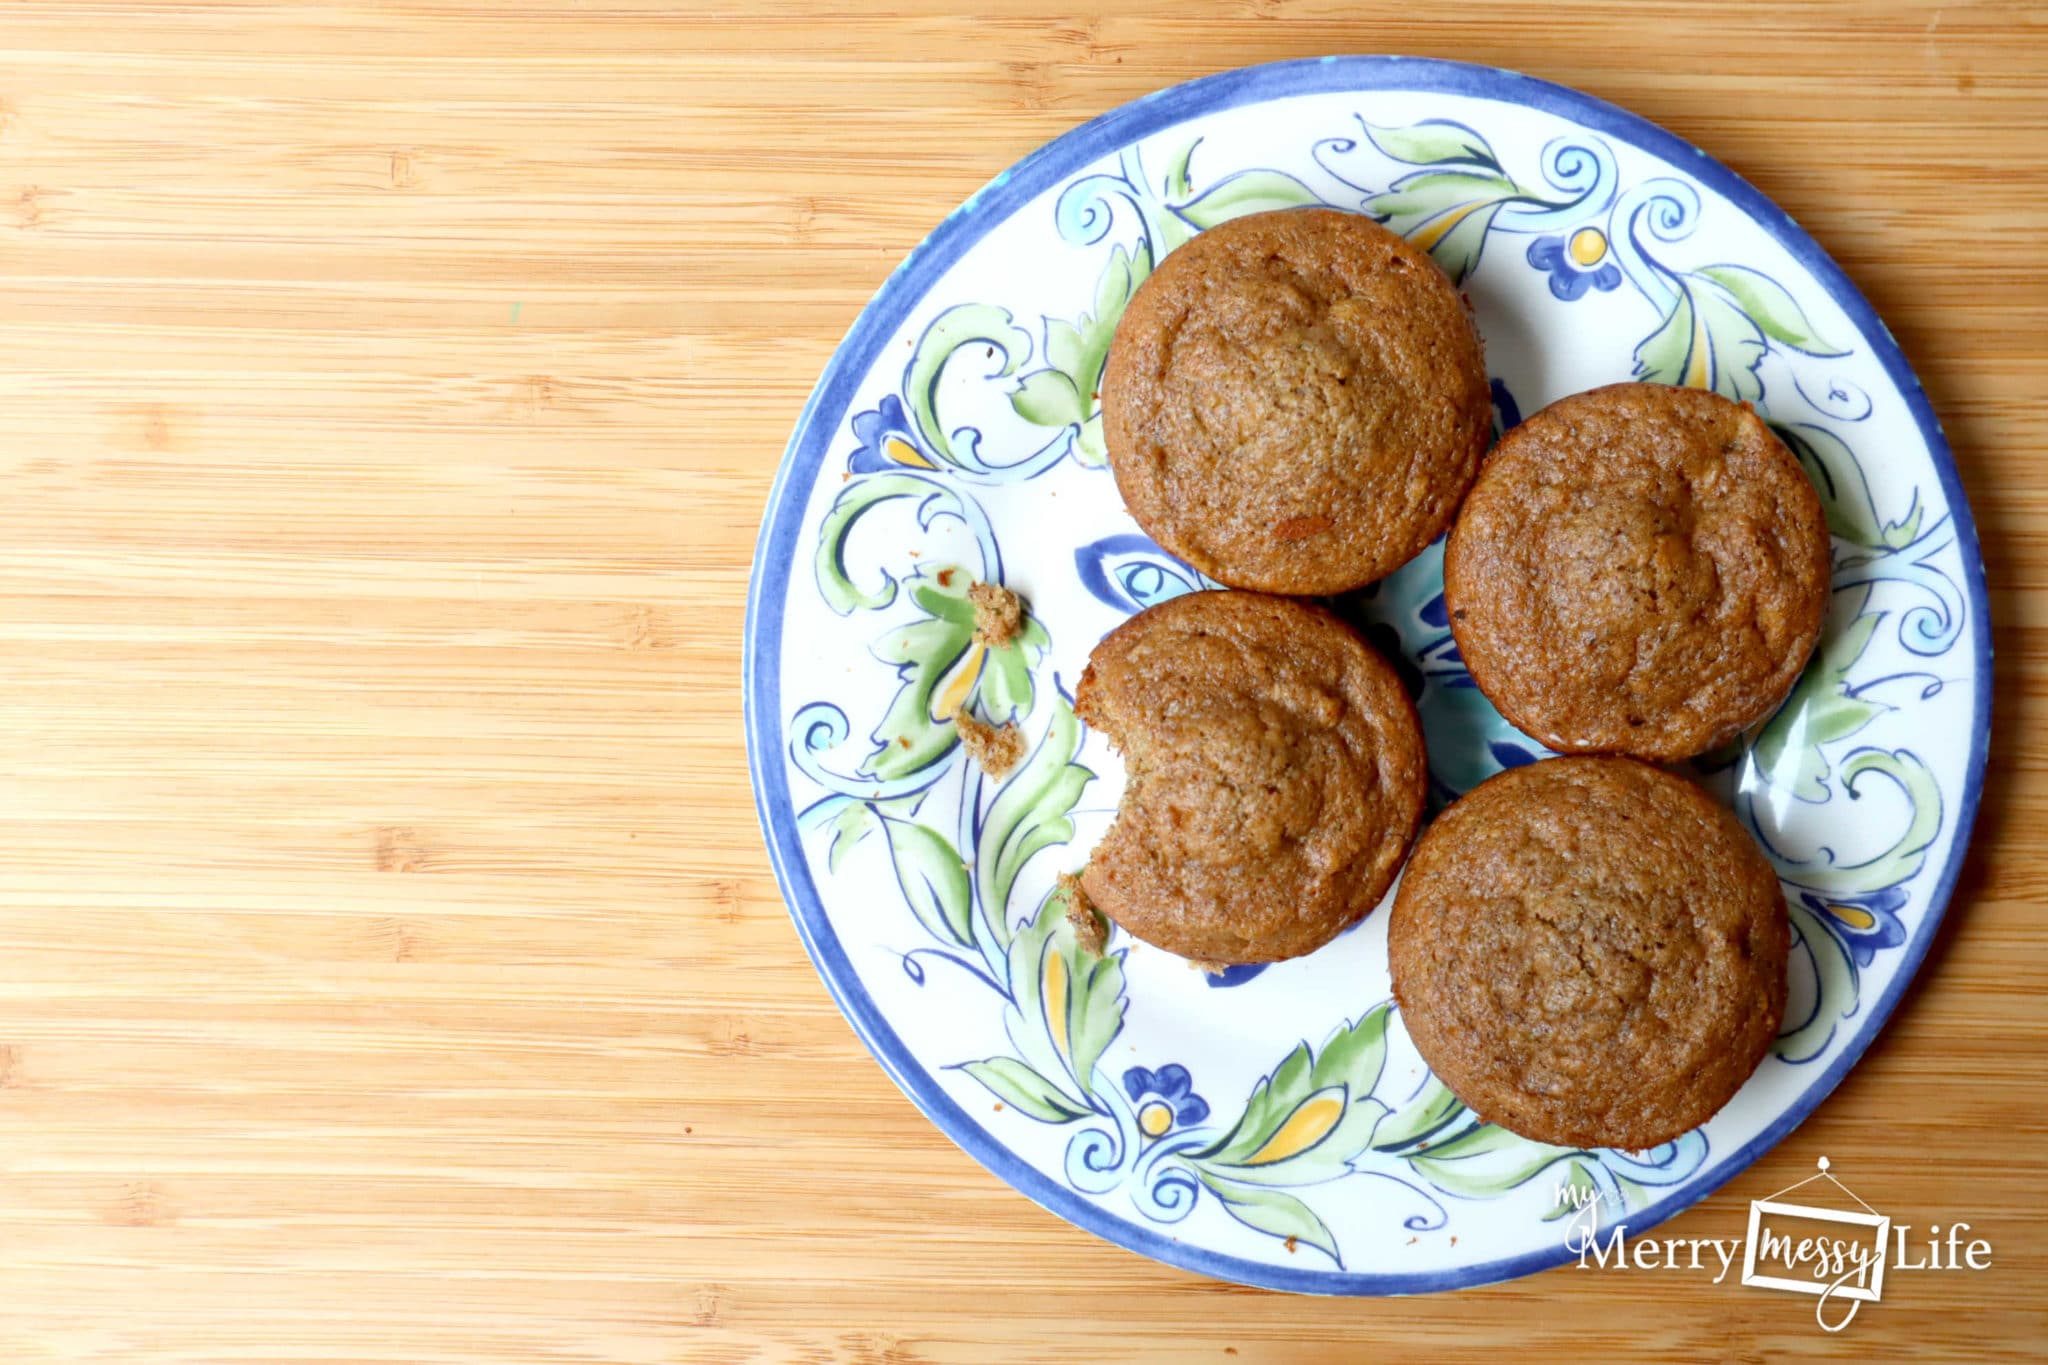 Hearty Banana Flax Muffins Recipe - Hearty and Real